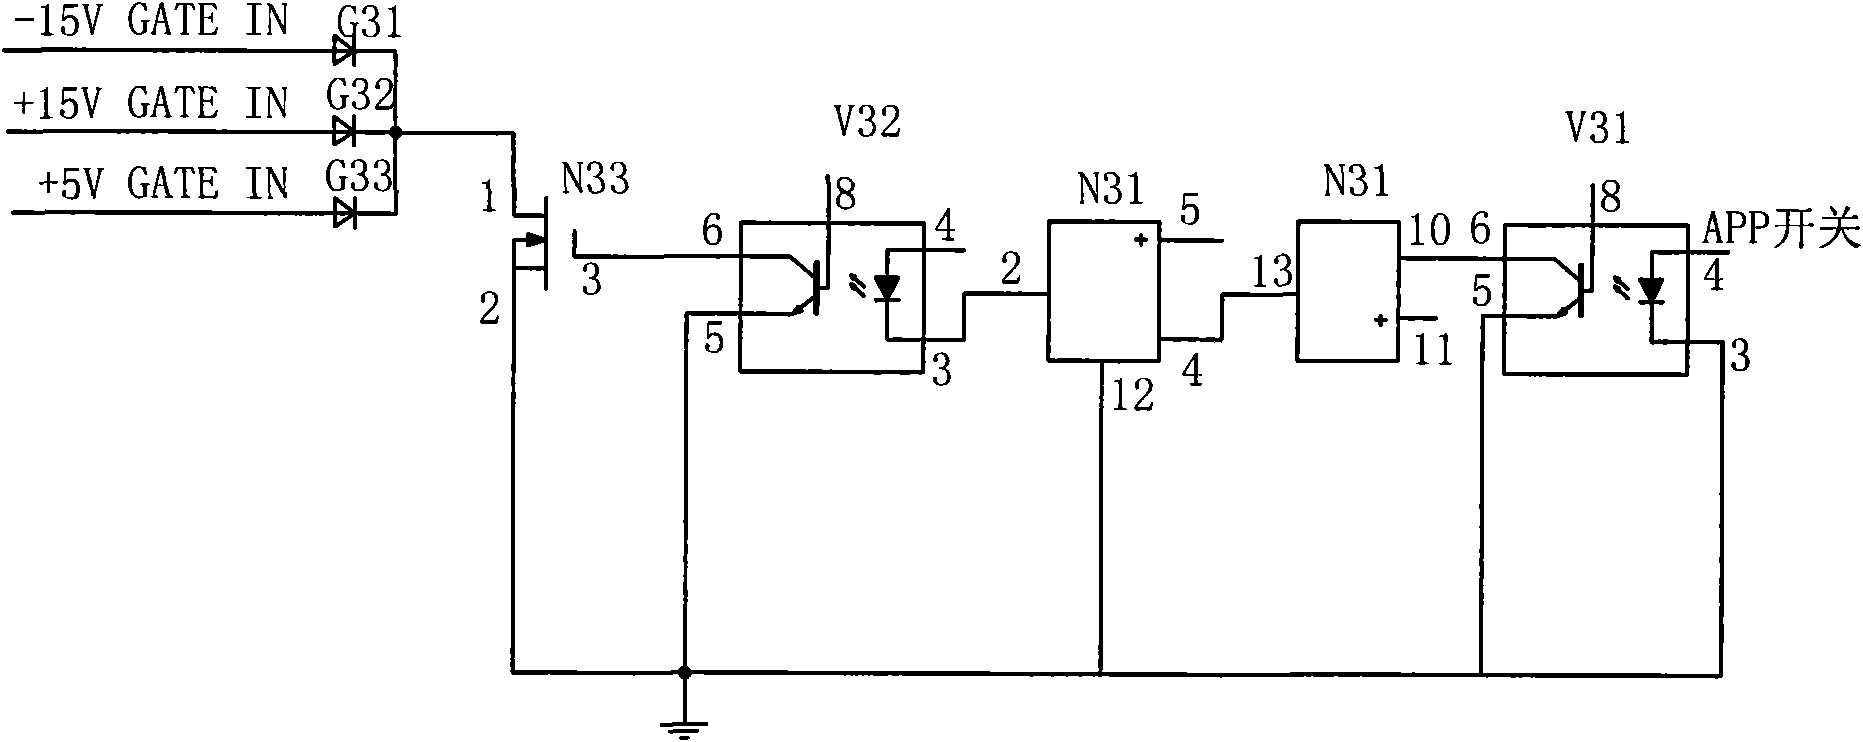 Switching power supply module with high reliability and low power consumption